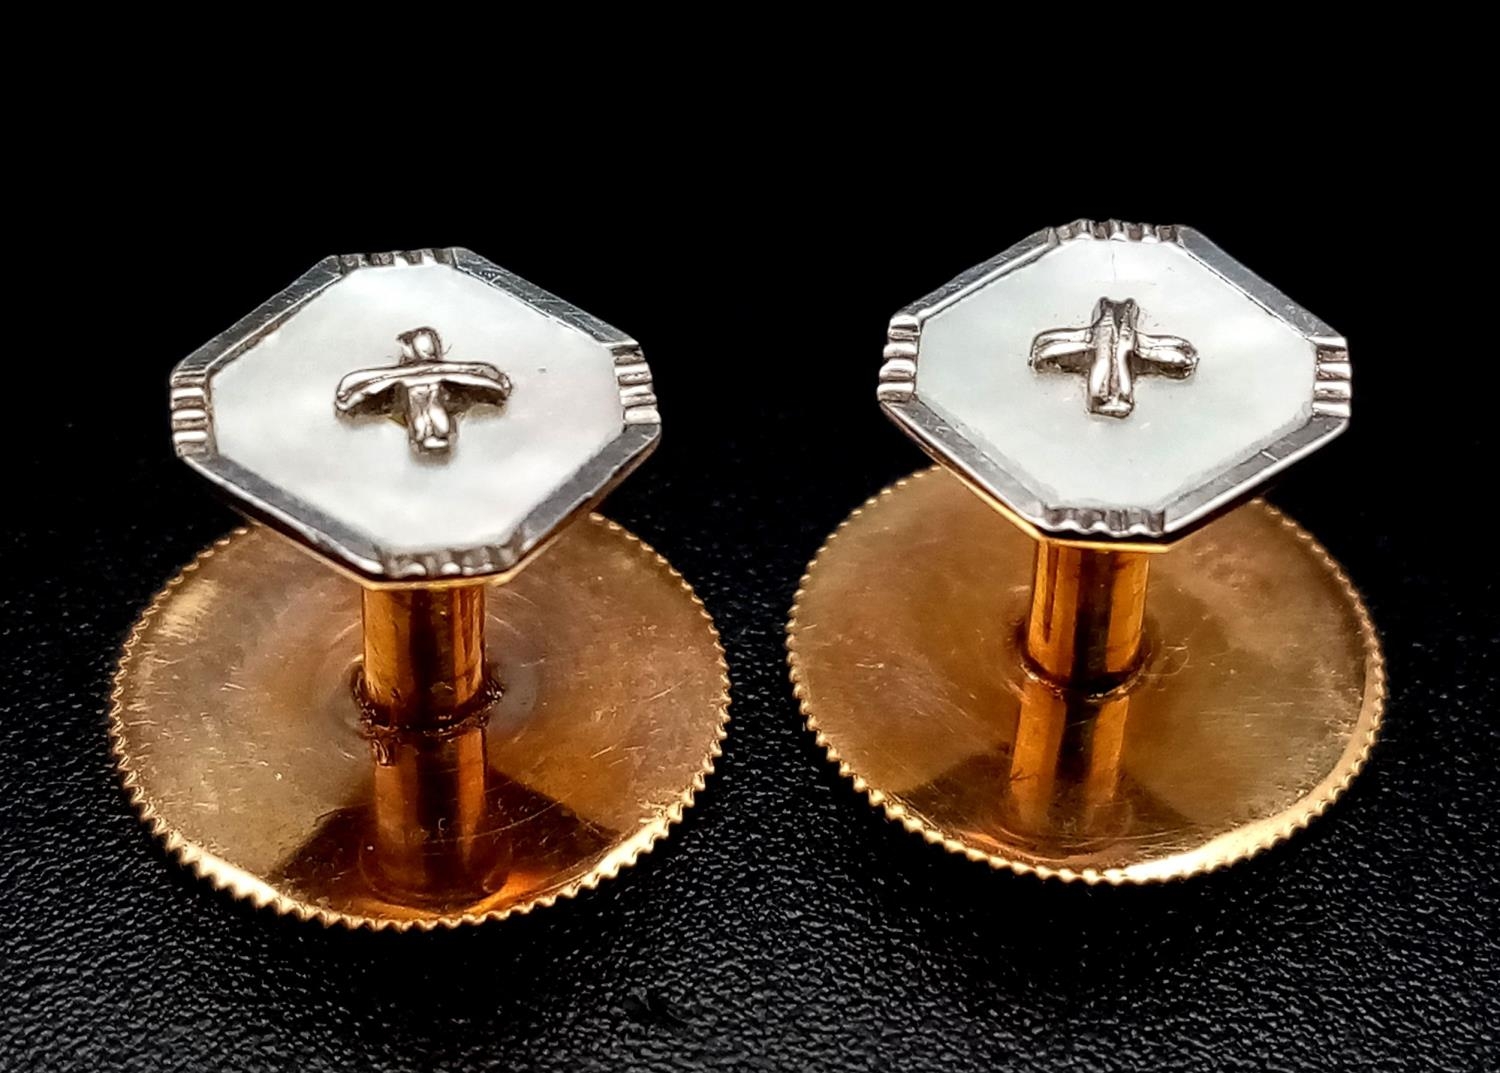 A Pair of 18 and 9K Mother of Pearl Shirt Studs - In their original packaging. 2.1g total weight. - Image 2 of 4